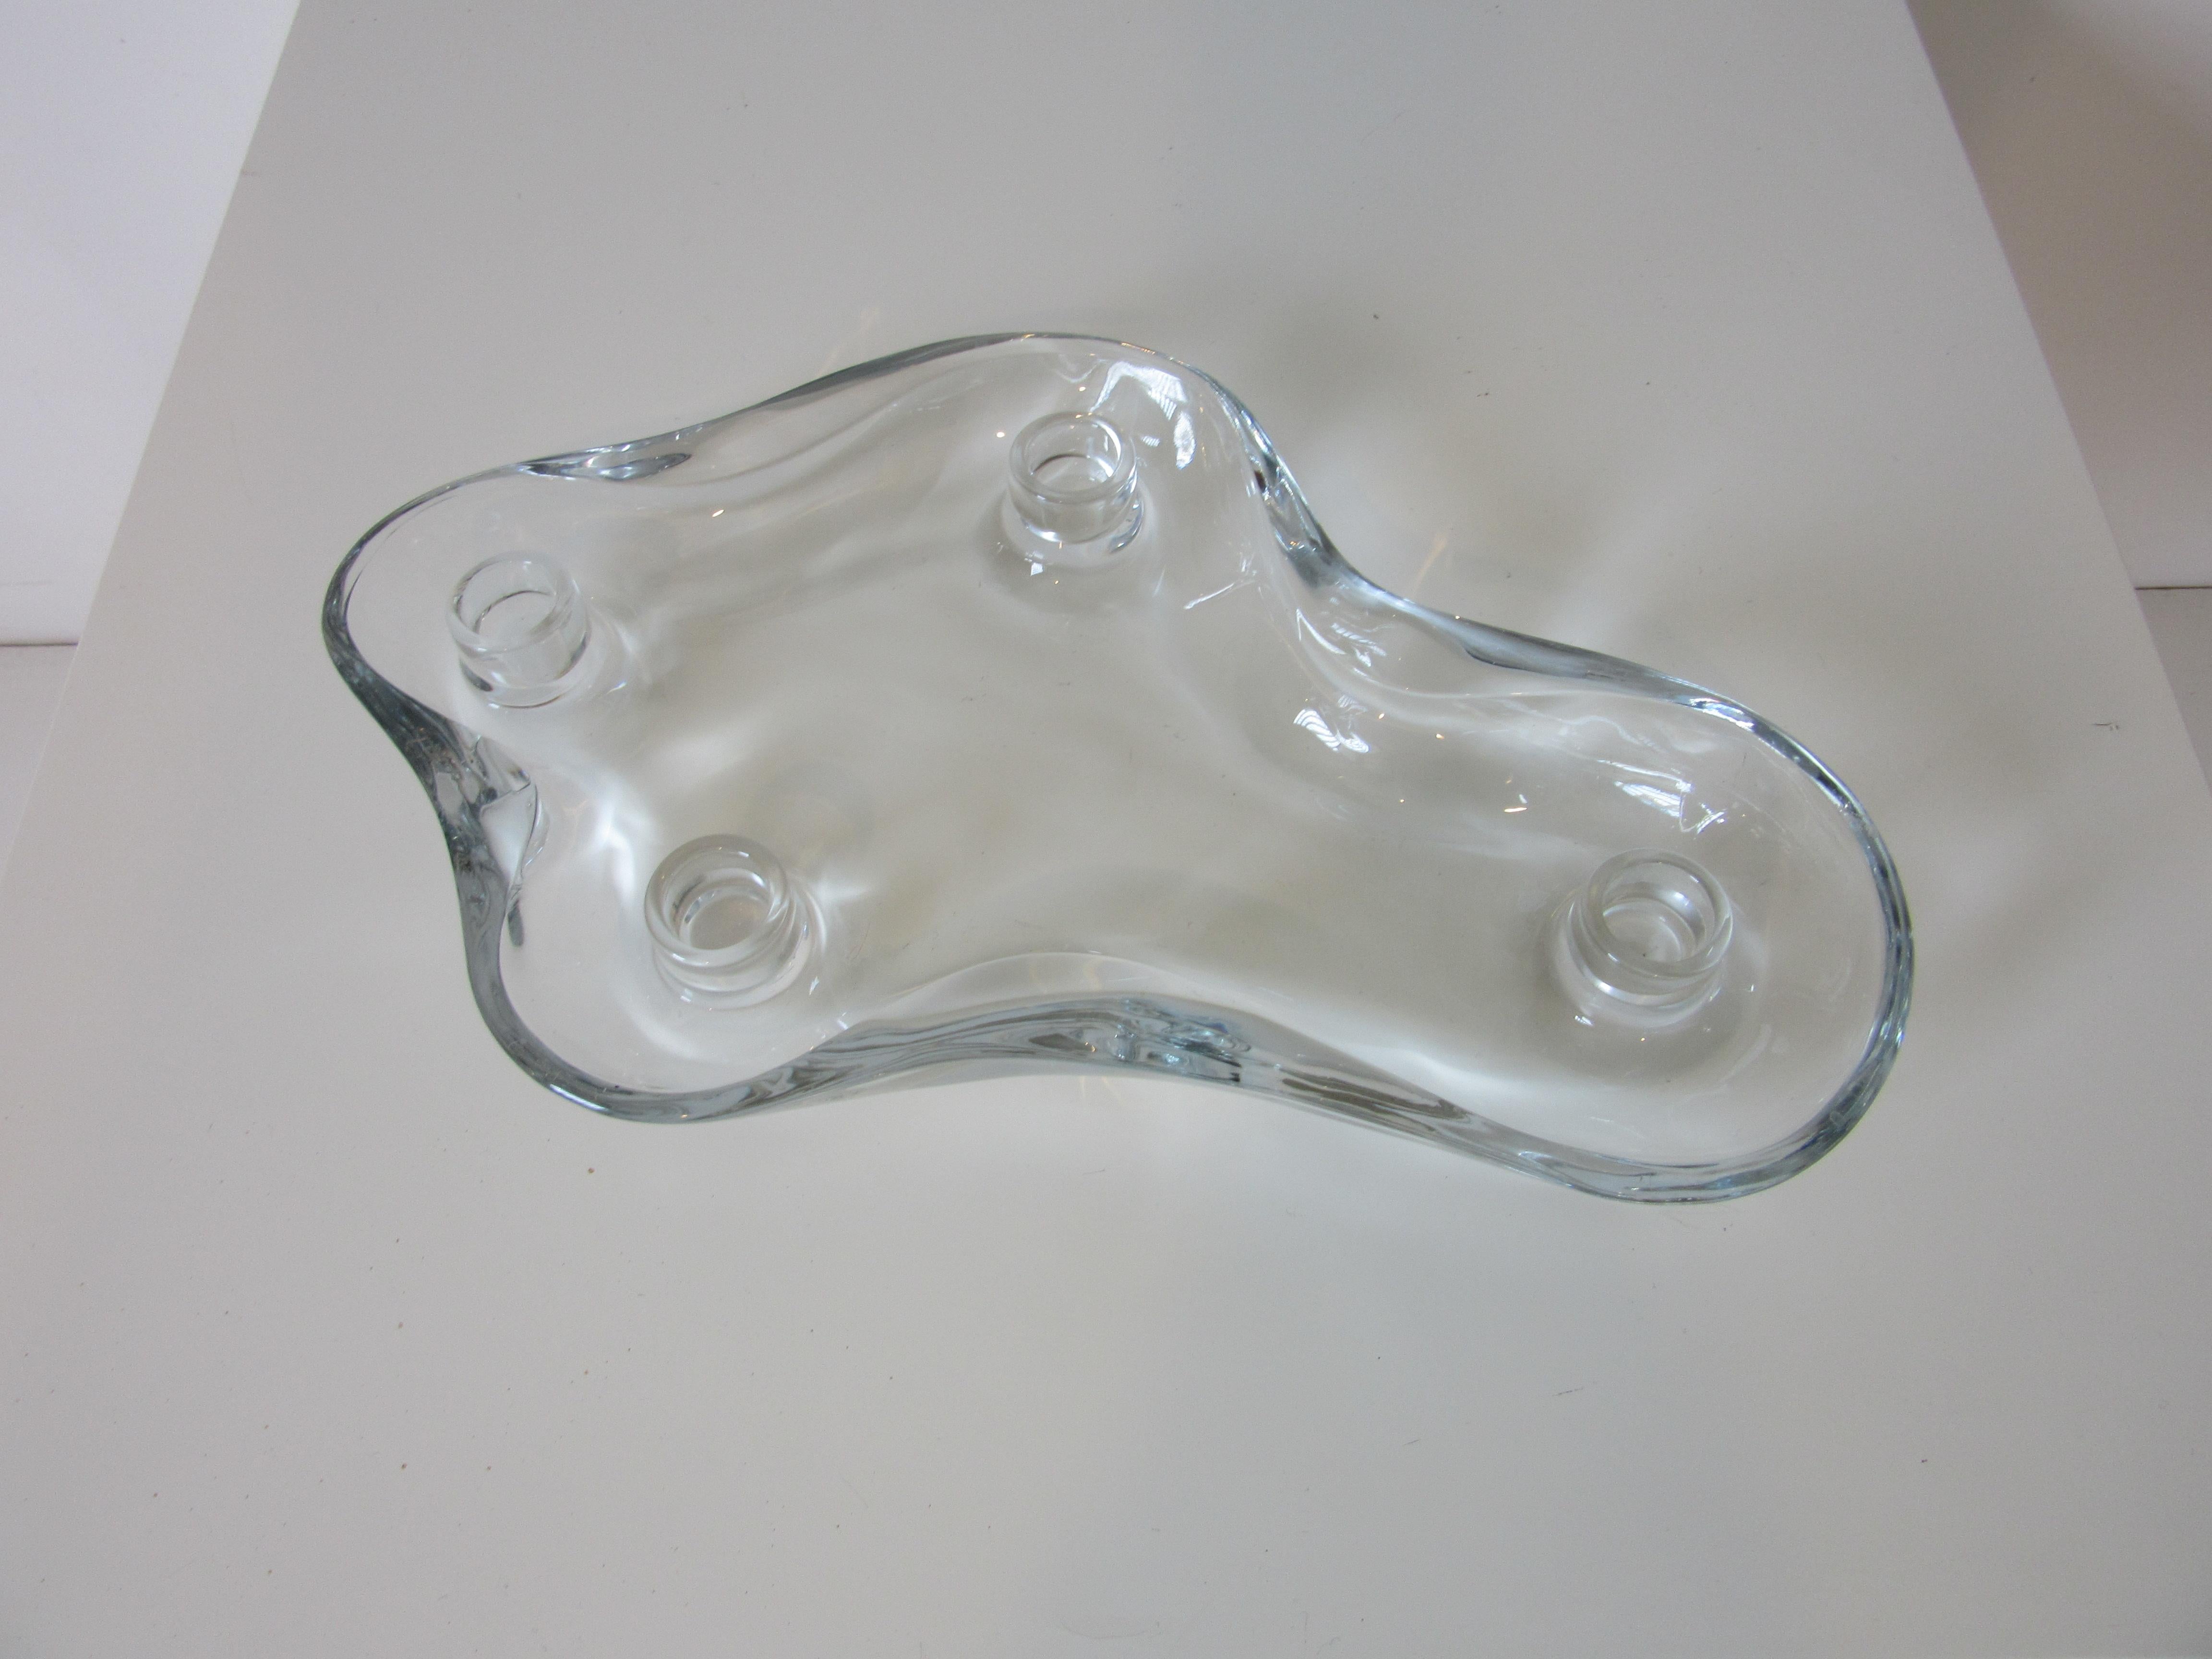 A biomorphic sculptural thick glass flower floater and candleholder designed by Pipsan Saarinen Swanson from the famous Saarinen family daughter of Eliel and sister to Eero Saarinen. She started her career then moved on to working with her husband